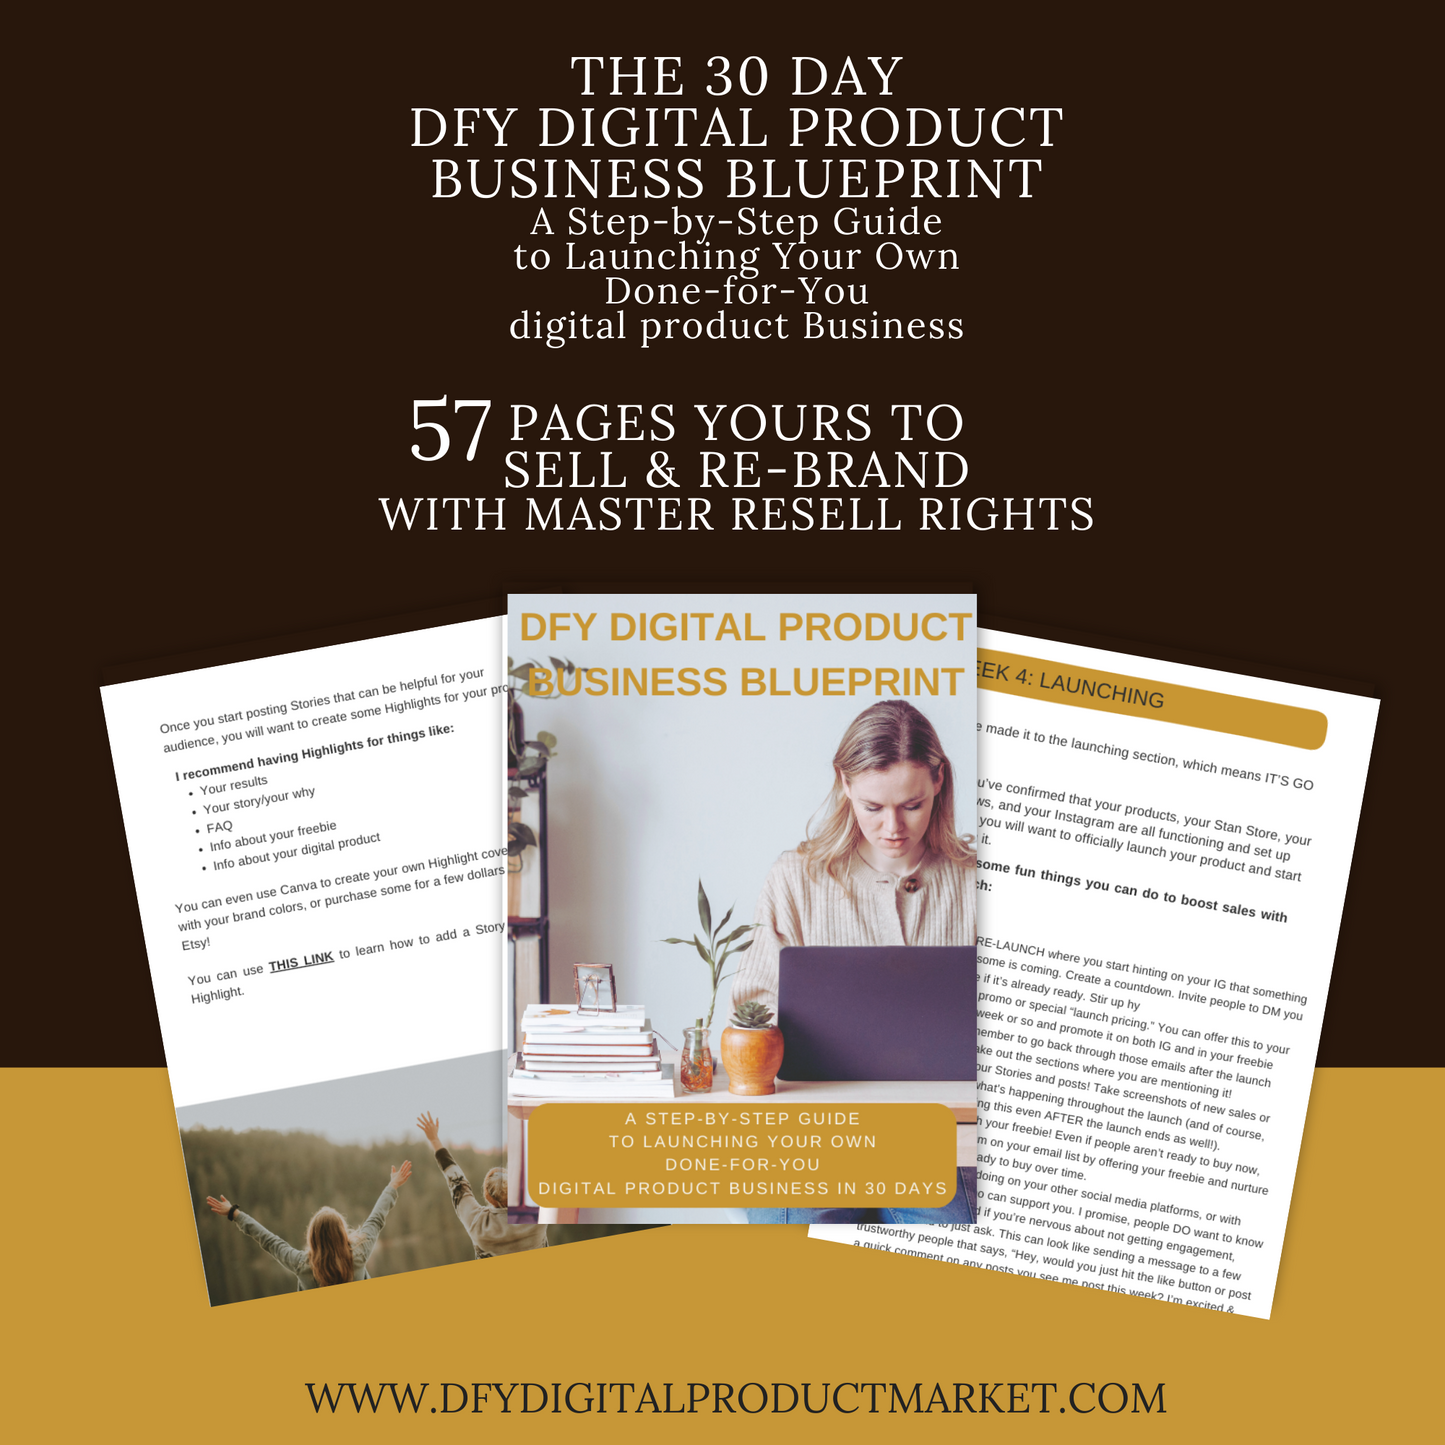 The 30 day DFY Digital Product Business Blueprint - Launch Your DFY Digital Business In 30 Days